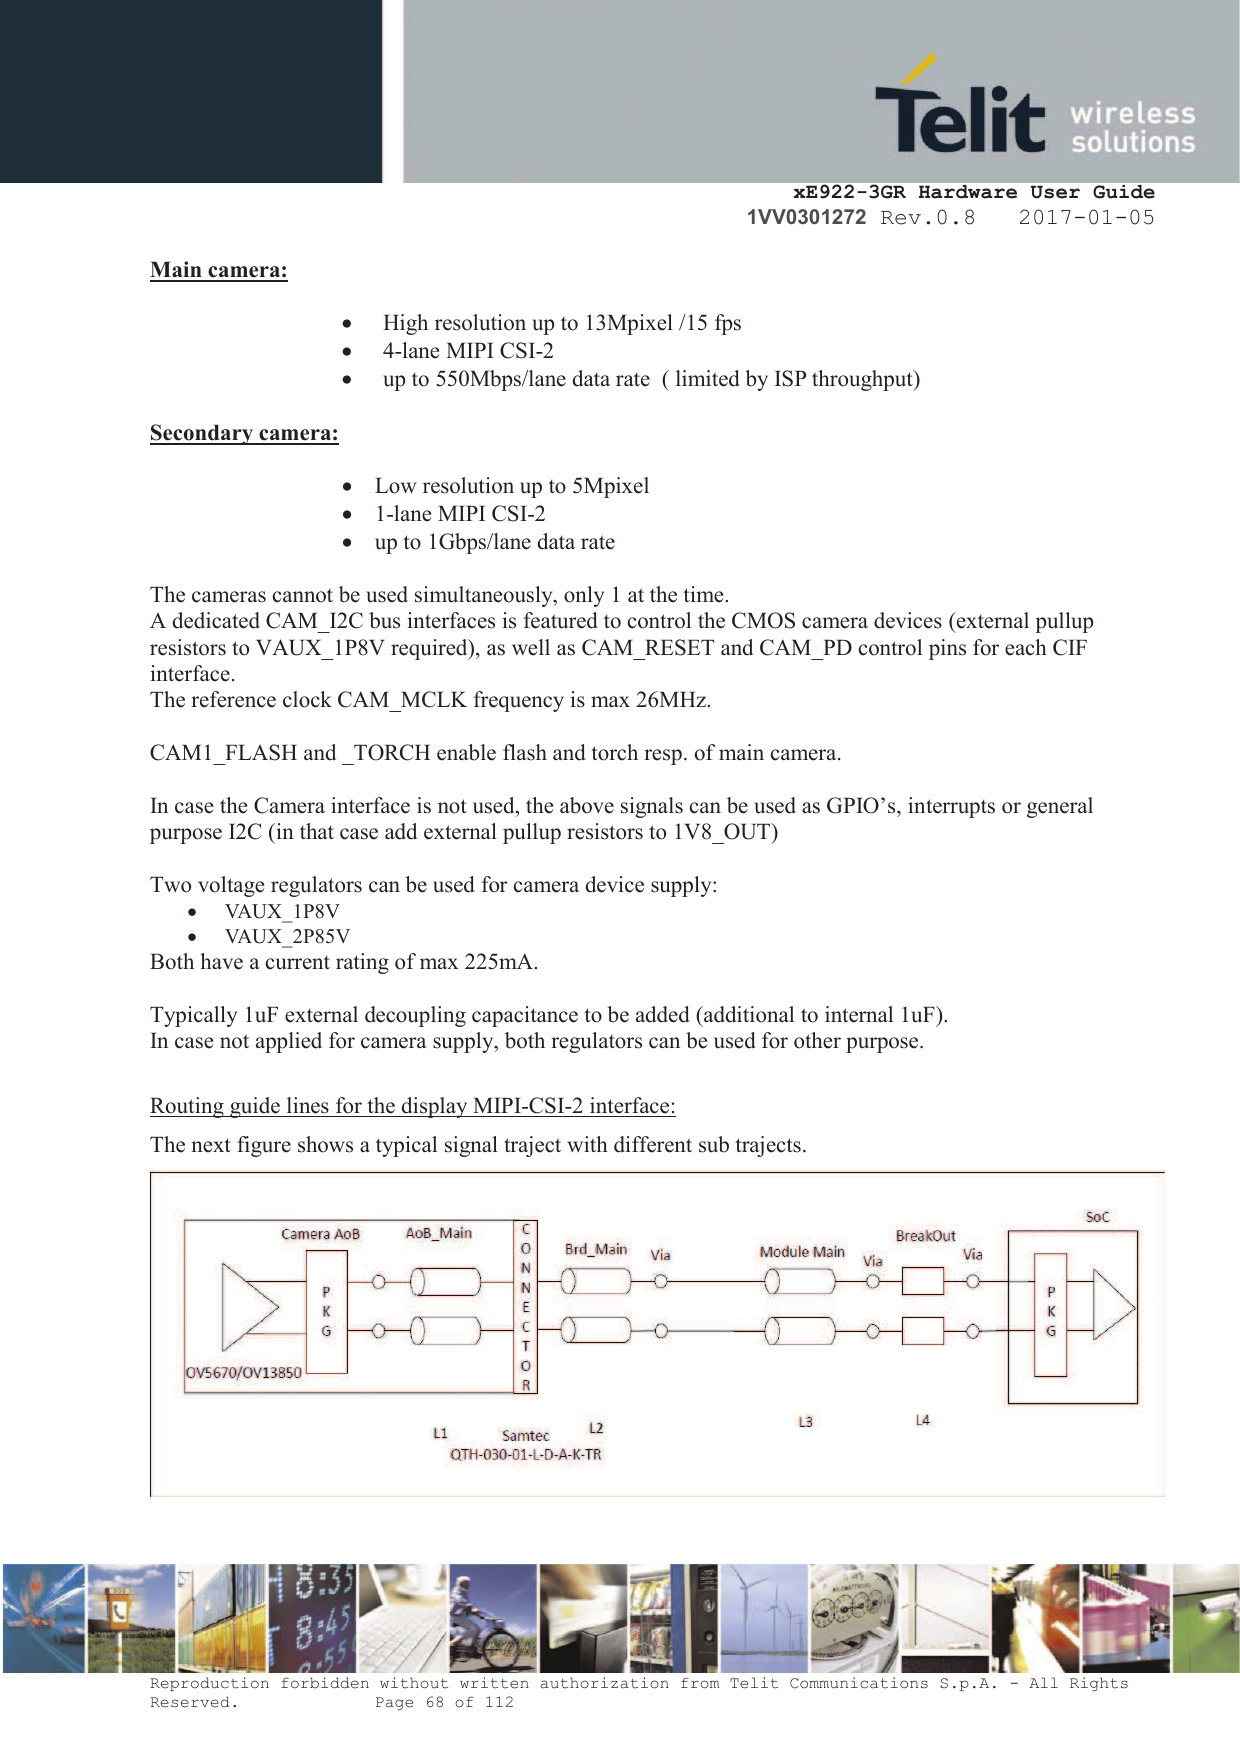     xE922-3GR Hardware User Guide 1VV0301272 Rev.0.8   2017-01-05 Reproduction forbidden without written authorization from Telit Communications S.p.A. - All Rights Reserved.    Page 68 of 112  Main camera:   · High resolution up to 13Mpixel /15 fps · 4-lane MIPI CSI-2 · up to 550Mbps/lane data rate  ( limited by ISP throughput)   Secondary camera:   · Low resolution up to 5Mpixel · 1-lane MIPI CSI-2 · up to 1Gbps/lane data rate  The cameras cannot be used simultaneously, only 1 at the time. A dedicated CAM_I2C bus interfaces is featured to control the CMOS camera devices (external pullup resistors to VAUX_1P8V required), as well as CAM_RESET and CAM_PD control pins for each CIF interface. The reference clock CAM_MCLK frequency is max 26MHz.  CAM1_FLASH and _TORCH enable flash and torch resp. of main camera.  In case the Camera interface is not used, the above signals can be used as GPIO’s, interrupts or general purpose I2C (in that case add external pullup resistors to 1V8_OUT)  Two voltage regulators can be used for camera device supply: · VAUX_1P8V · VAUX_2P85V Both have a current rating of max 225mA.  Typically 1uF external decoupling capacitance to be added (additional to internal 1uF).  In case not applied for camera supply, both regulators can be used for other purpose.  Routing guide lines for the display MIPI-CSI-2 interface: The next figure shows a typical signal traject with different sub trajects.    